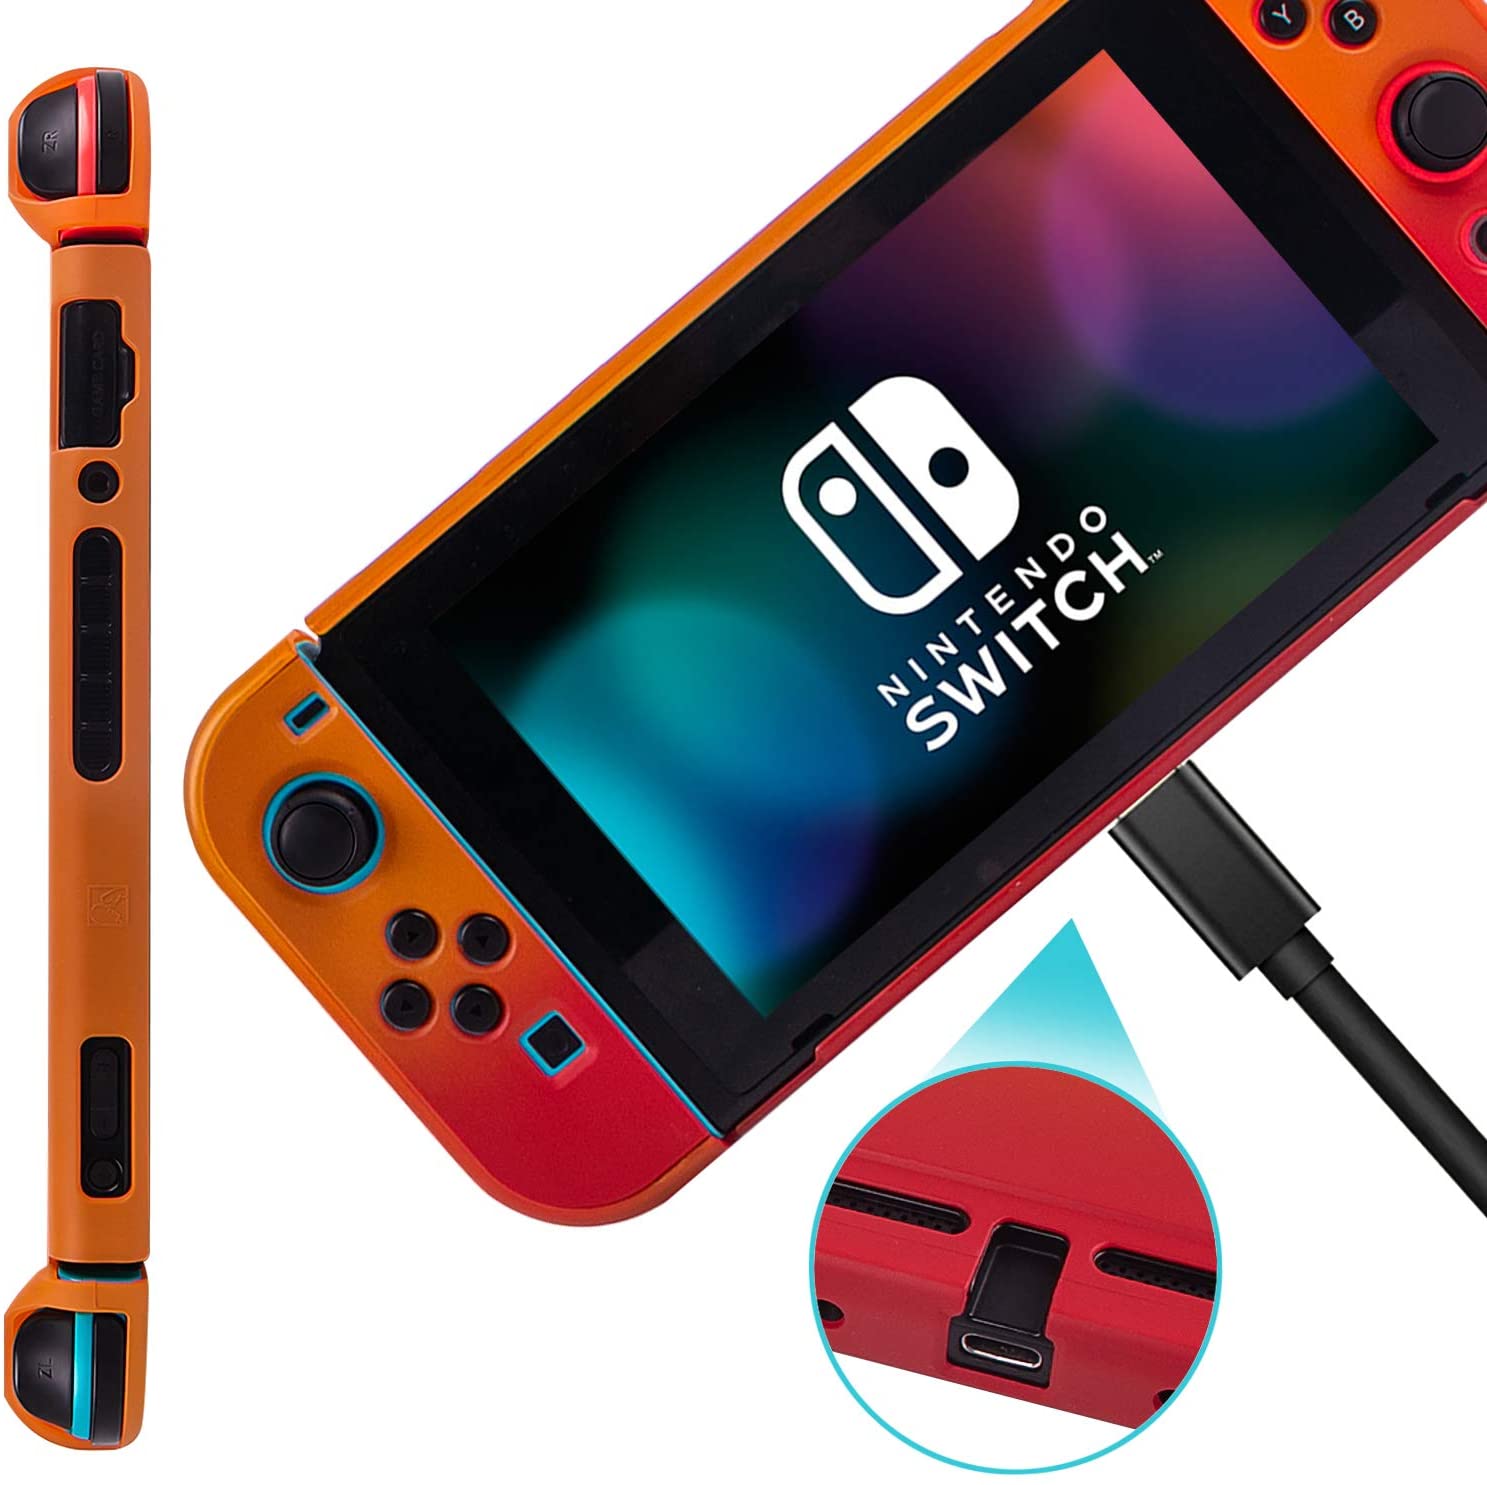 Protective Case Cover for Nintendo Switch, Hard Shell Case Handheld Grip for Nintendo Switch Console and Joy-Con Controllers with 2 Thumbsticks (Orange)